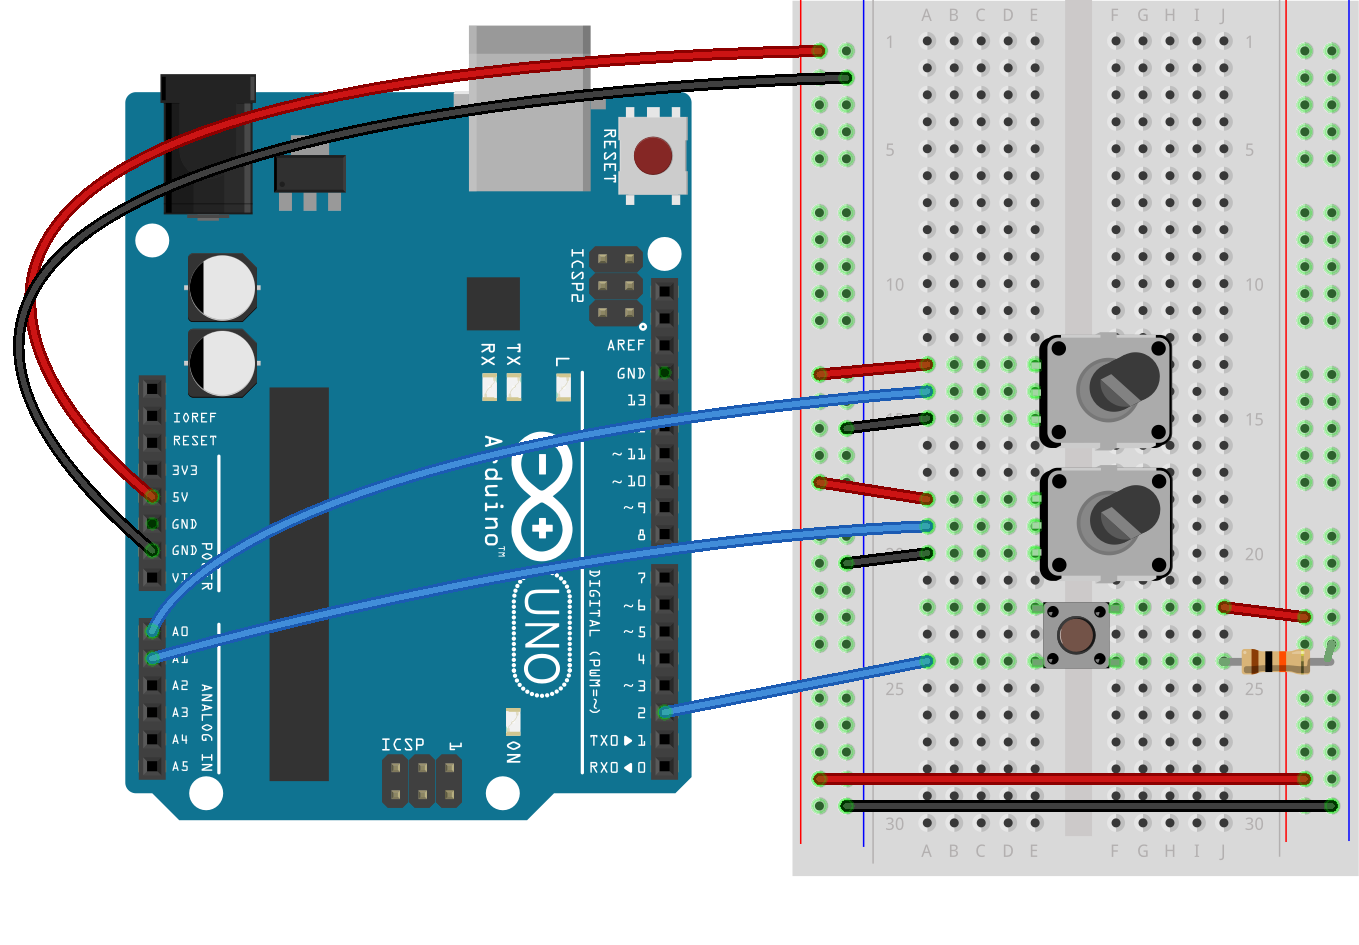 Breadboard view of an Arduino Uno attached to two potentiometers and a pushbutton.